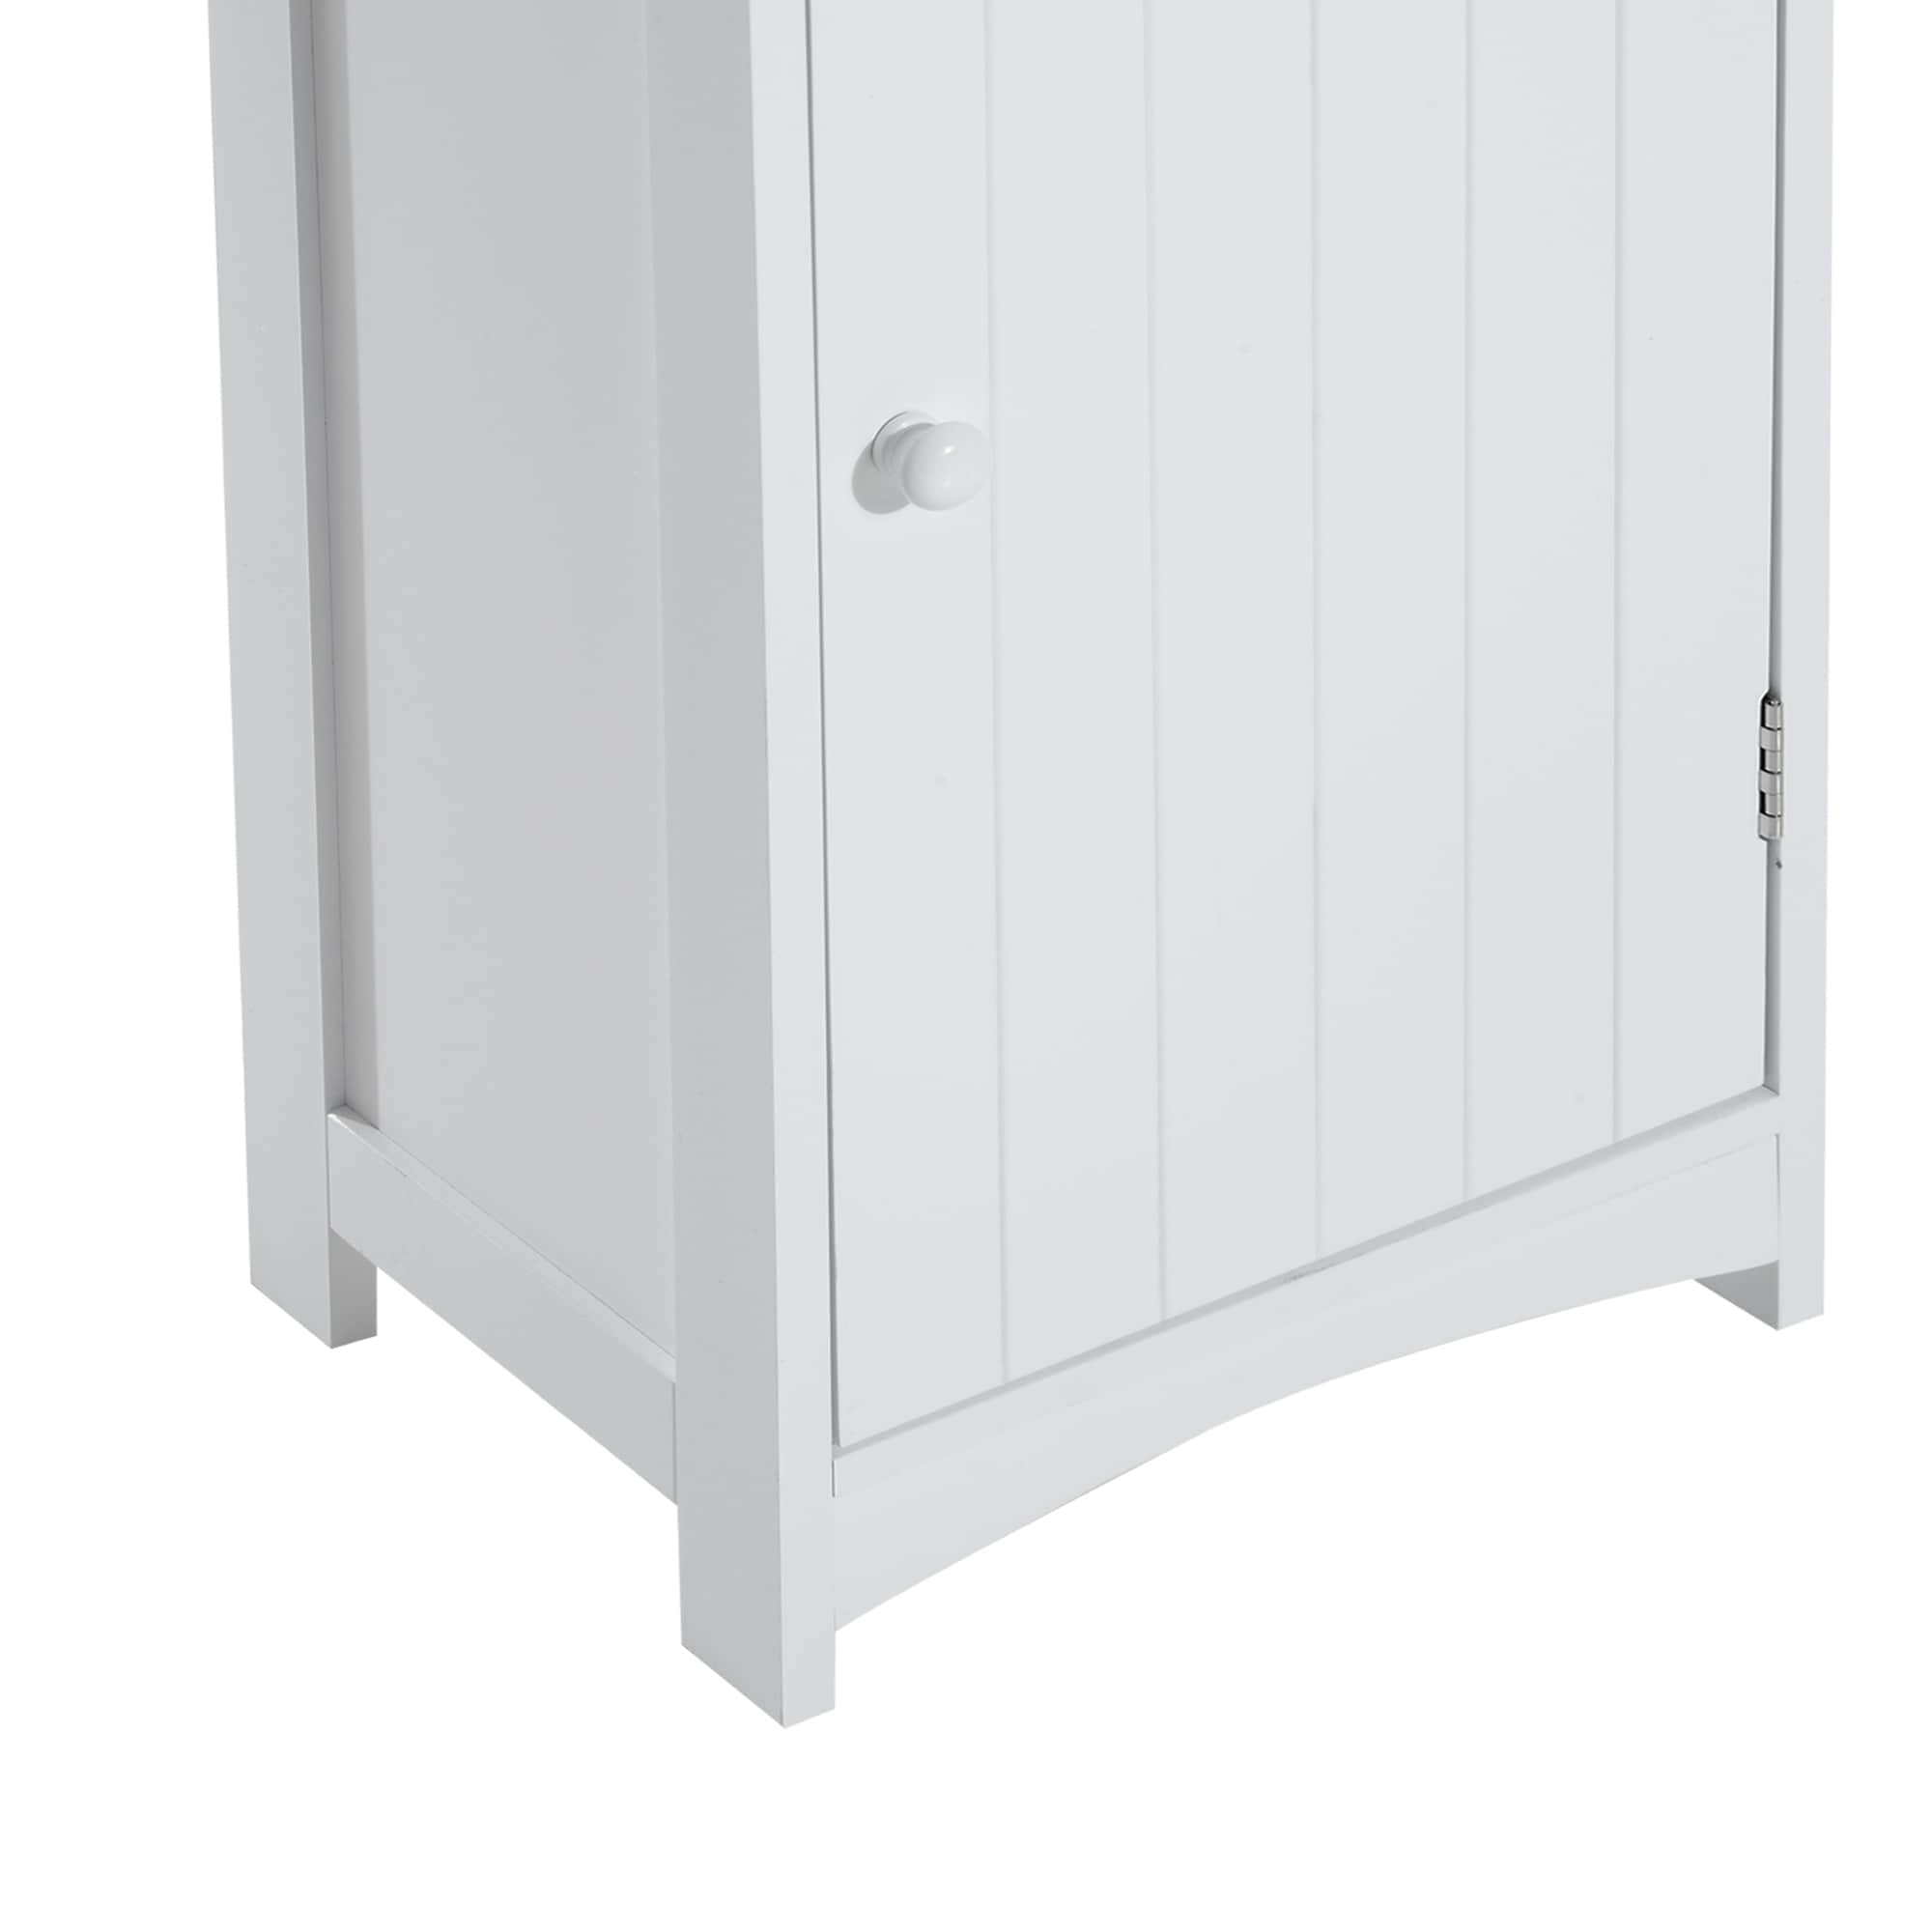 https://ak1.ostkcdn.com/images/products/is/images/direct/fd4771e3900847d0ca6e6be56ef0c8adf4a62374/HOMCOM-67%22-Tall-Bathroom-Storage-Cabinet%2C-Freestanding-Linen-Tower-with-3-Tier-Shelf%2C-Narrow-Side-Floor-Organizer%2C-White.jpg